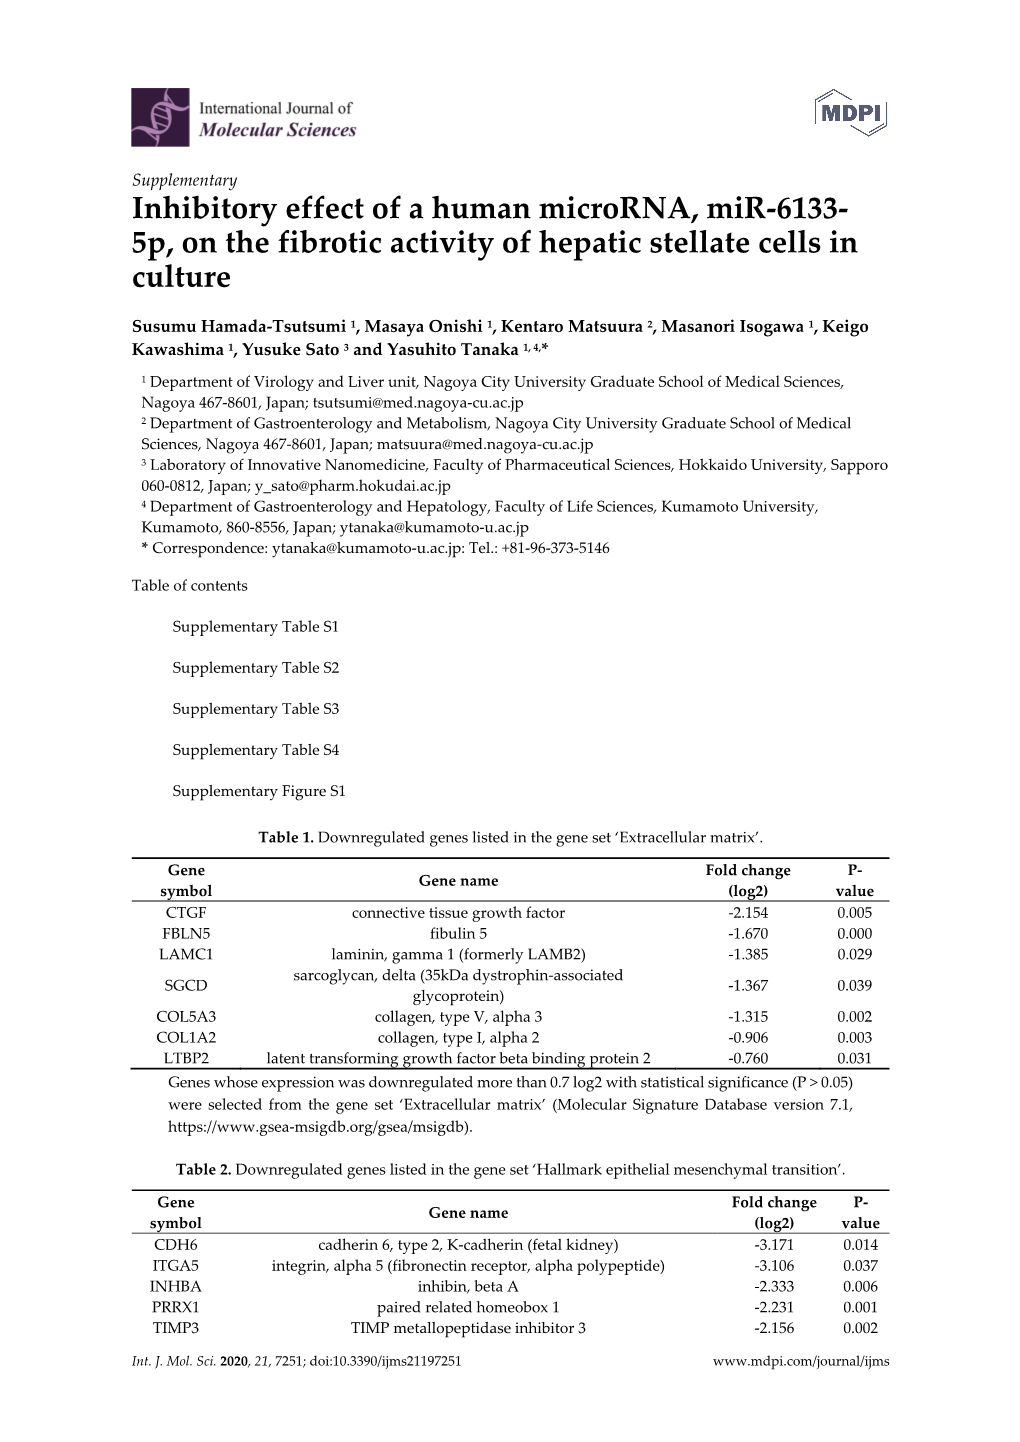 5P, on the Fibrotic Activity of Hepatic Stellate Cells in Culture